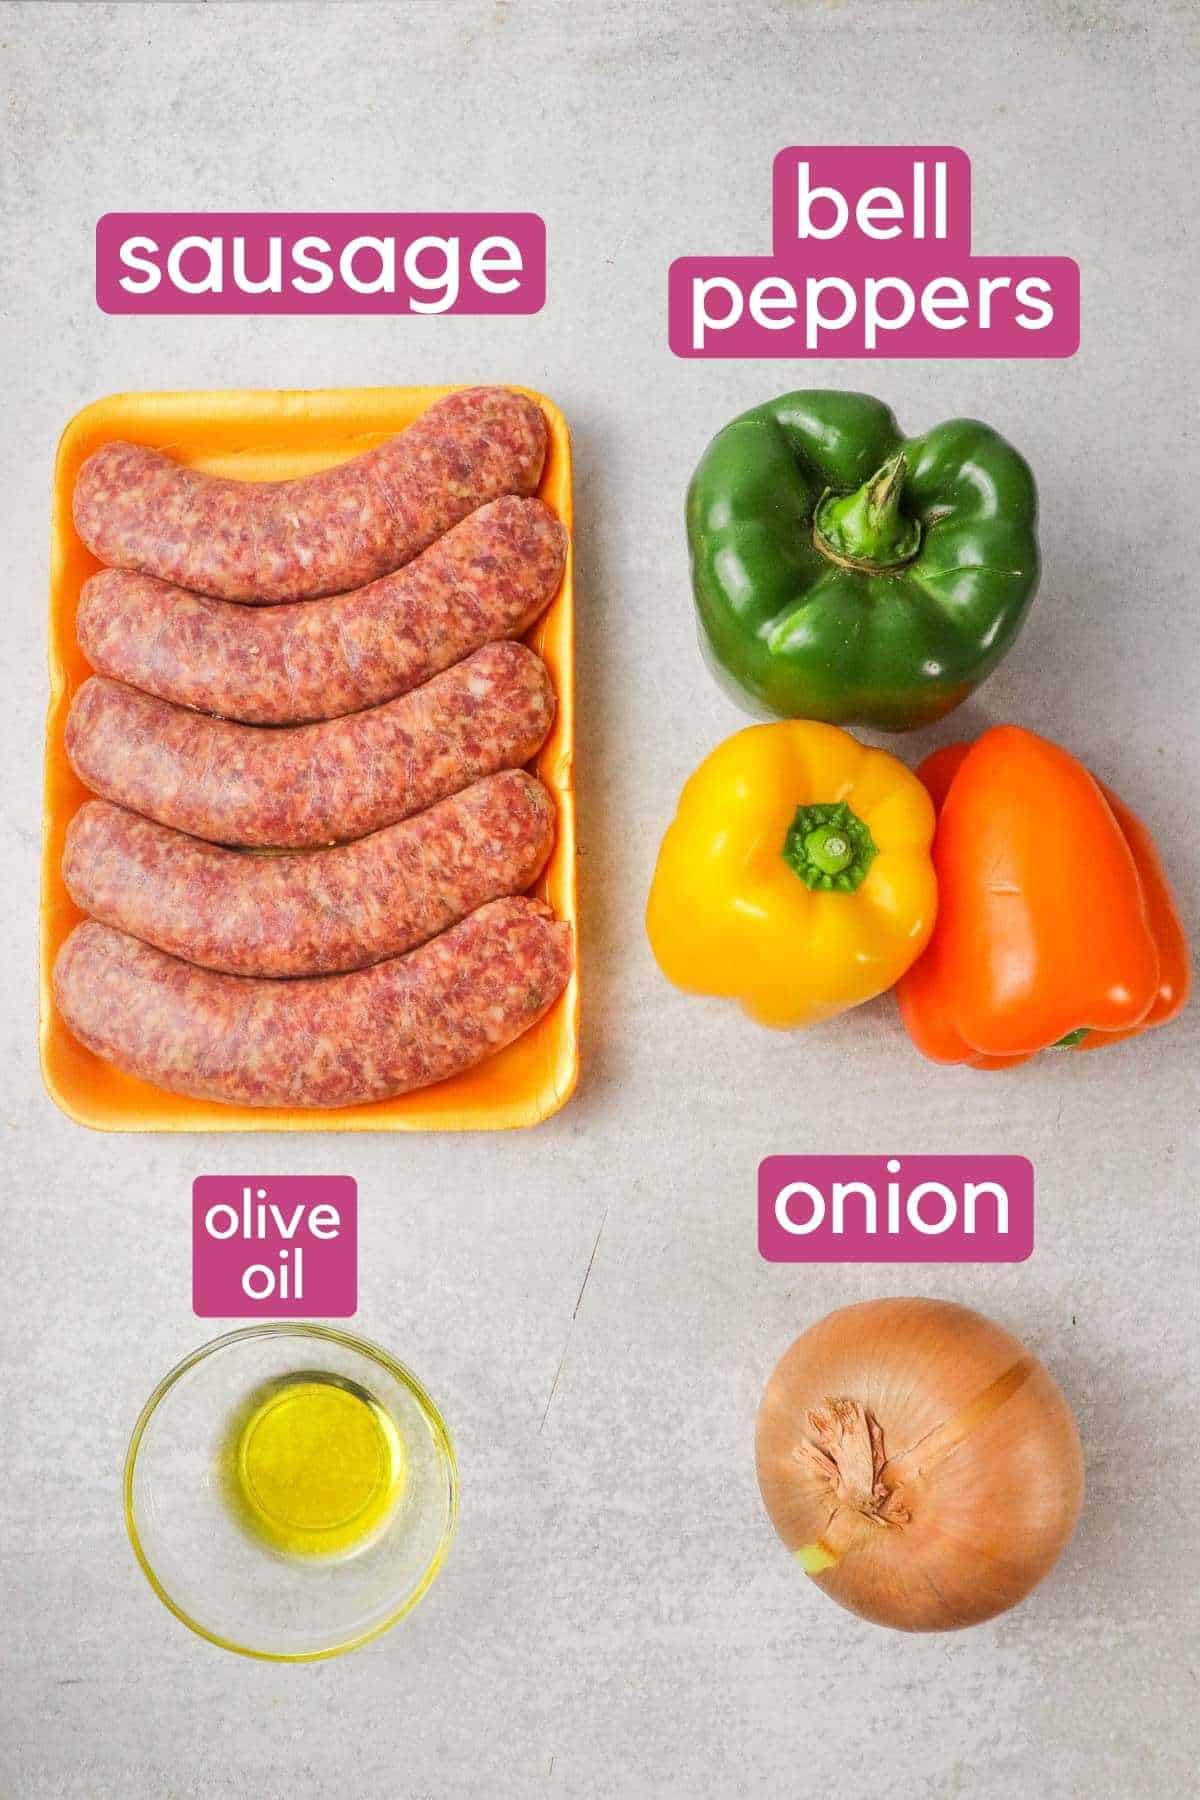 The ingredients needed to make air fryer sausage and peppers: sausages, bell peppers, olive oil, onion